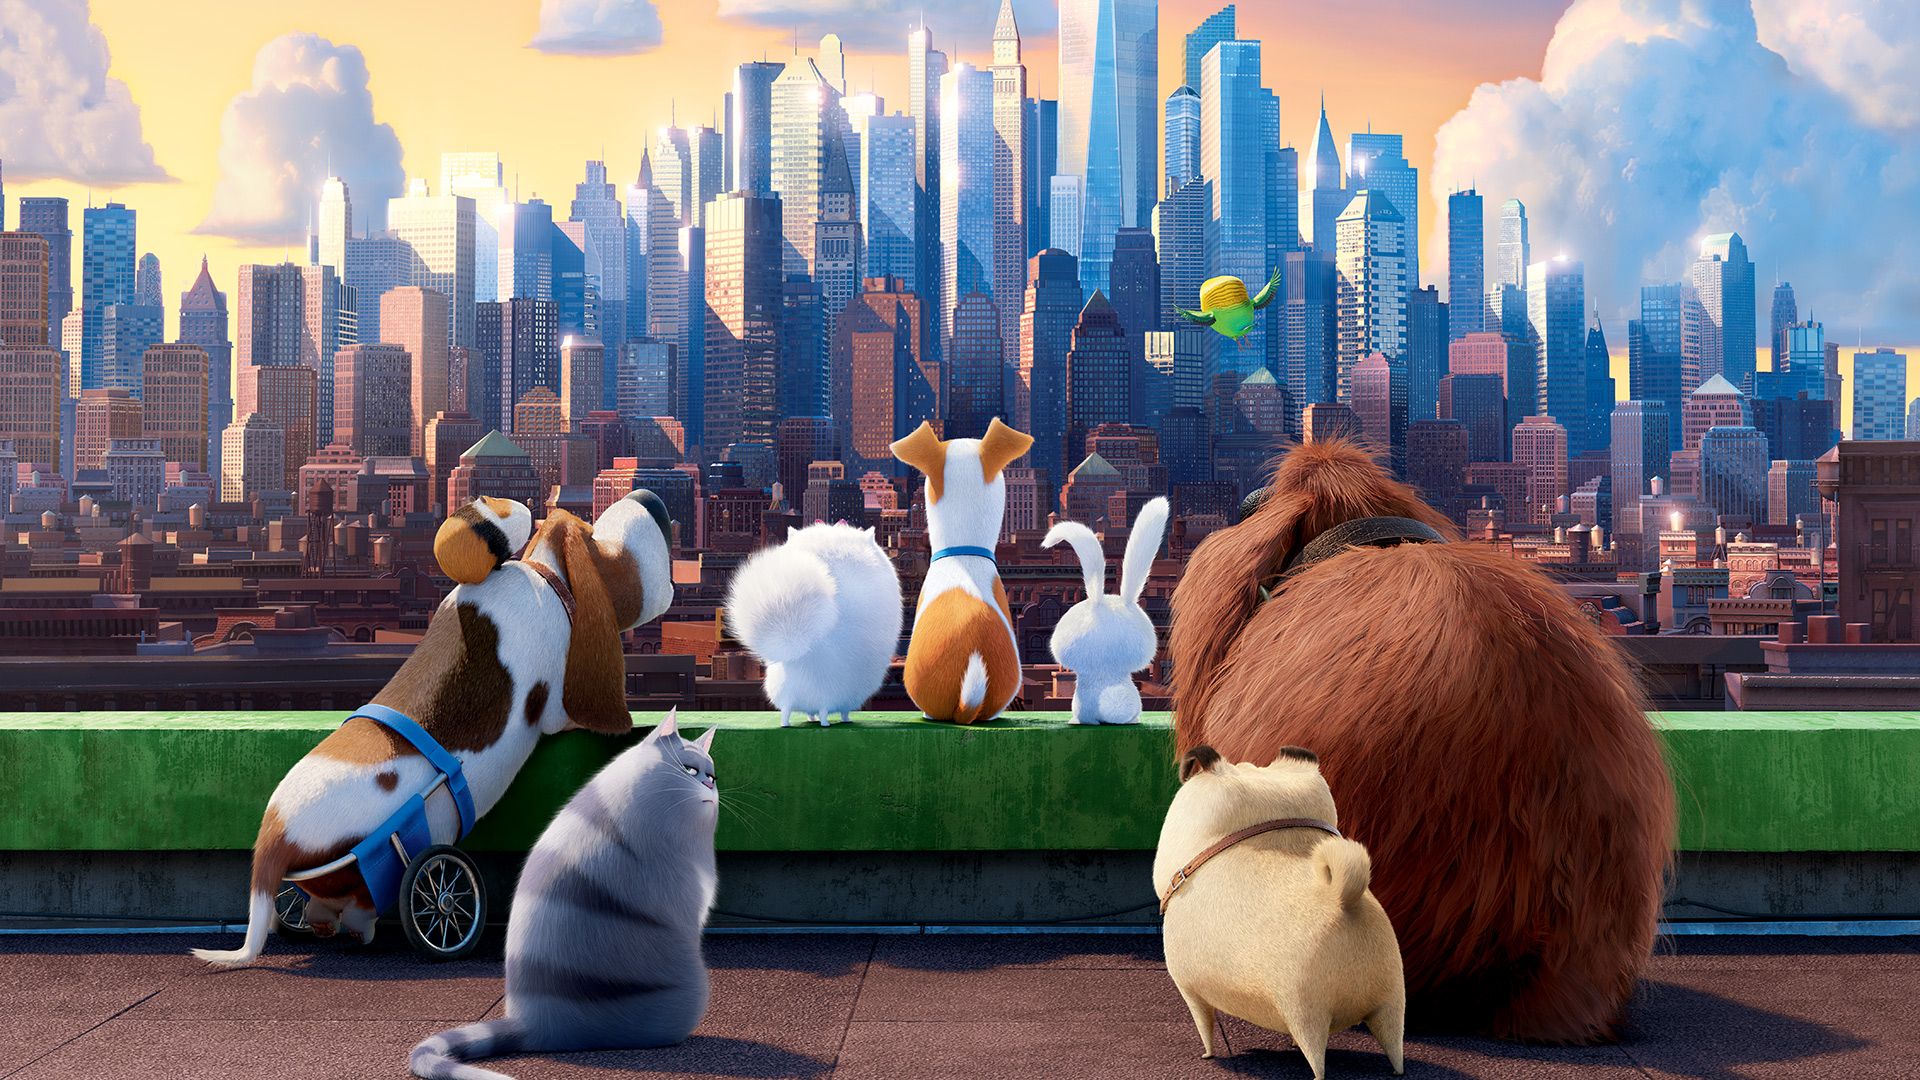 The Secret Life of Pets background